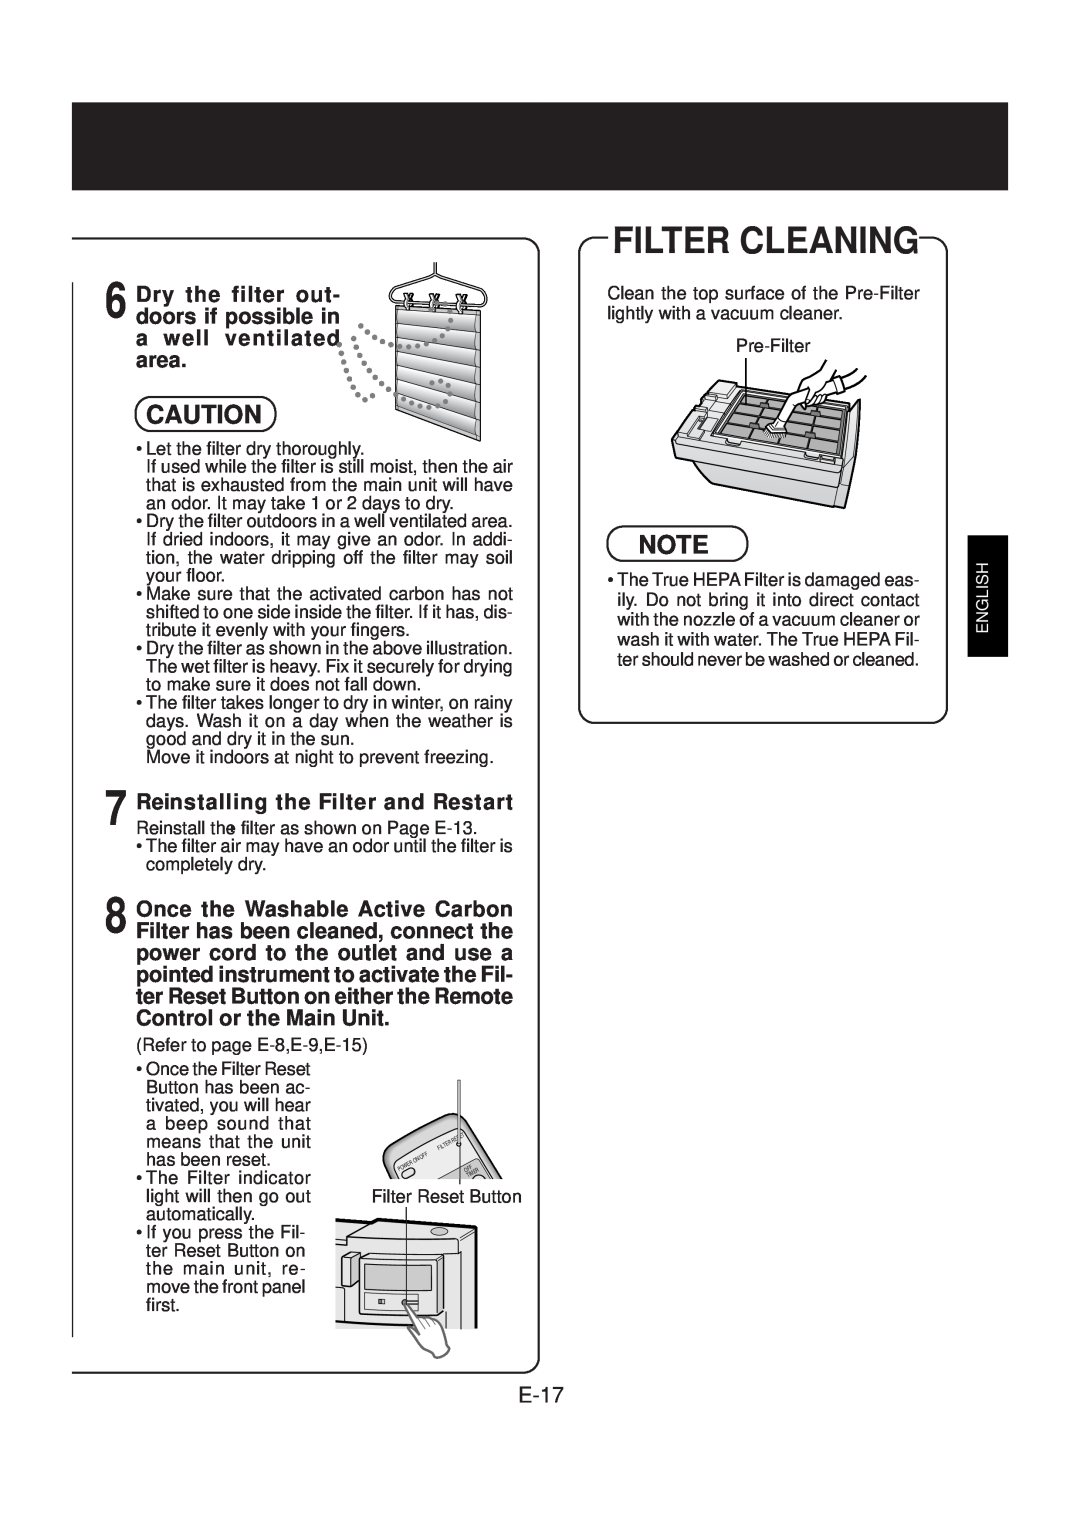 Sharp FP-N60CX operation manual Filter Cleaning, E-17 